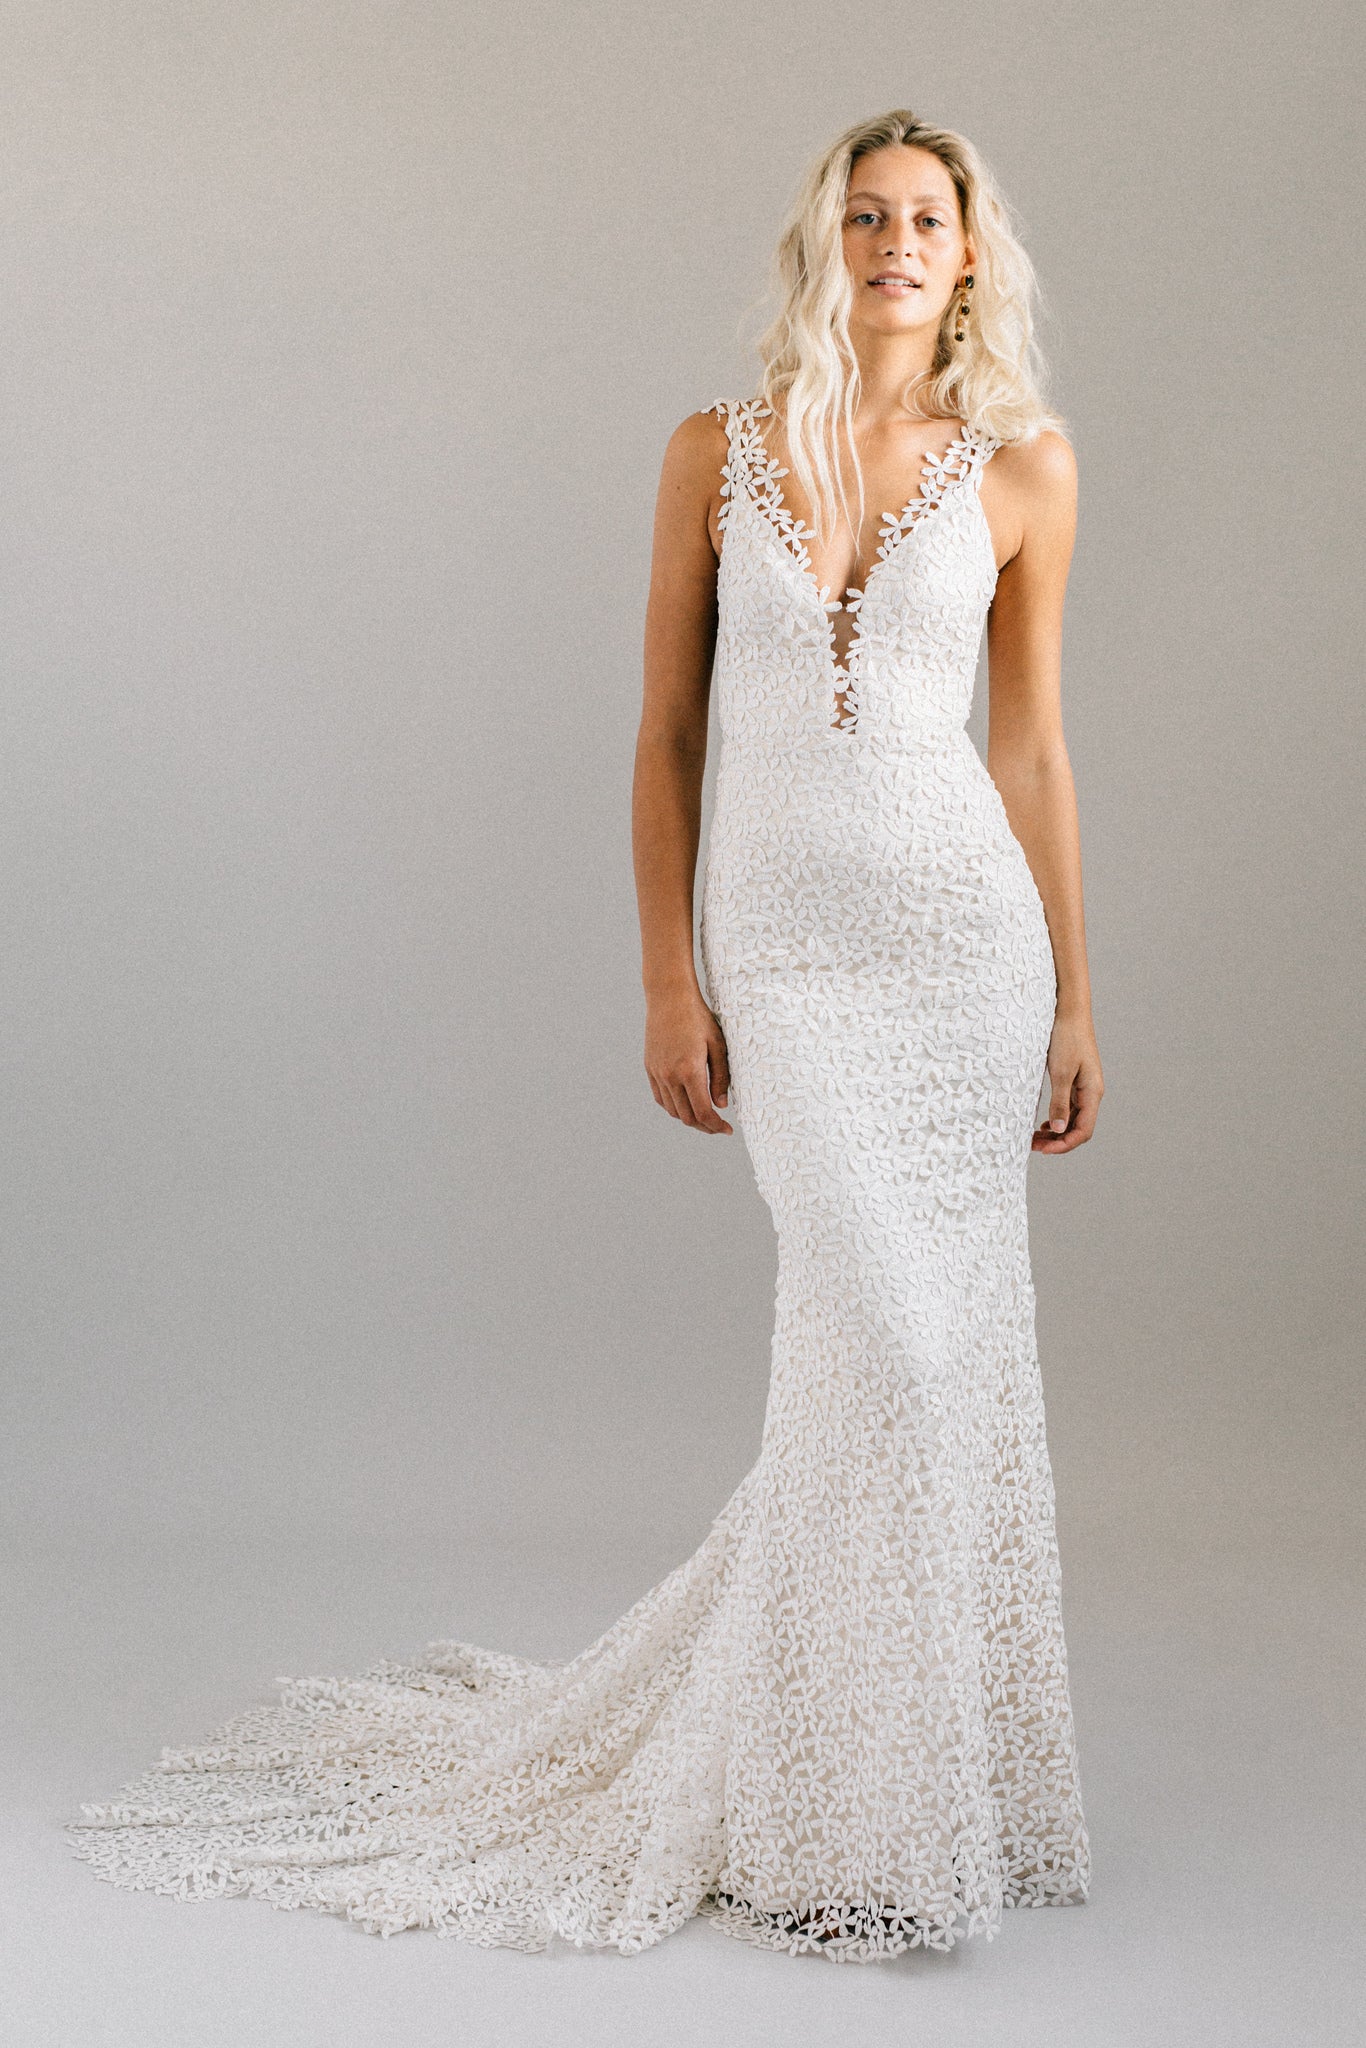 Flower print mermaid wedding dress with an open back, extra long train and a plunging neckline